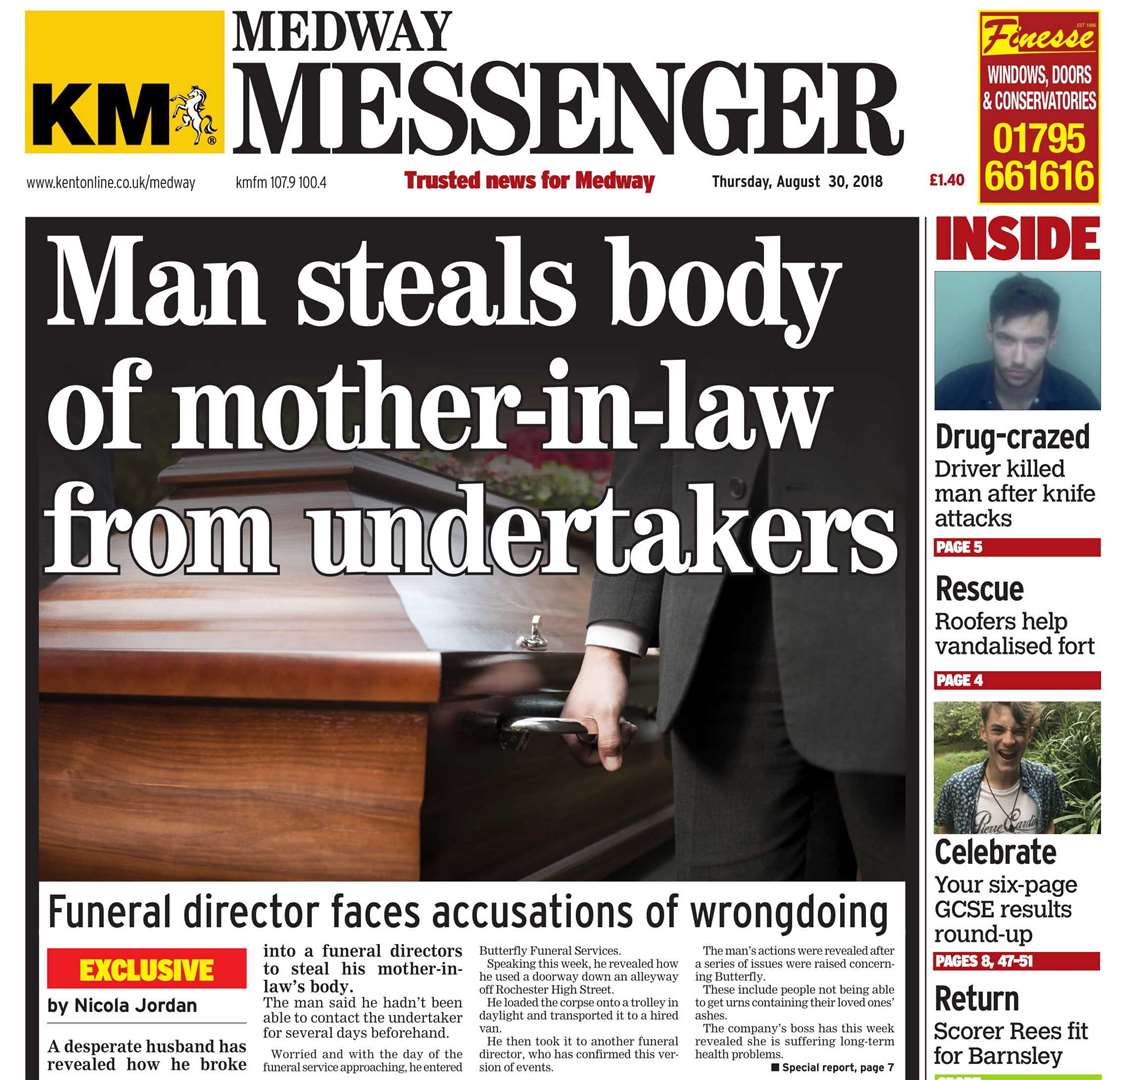 How our sister paper The Medway Messenger reported the story